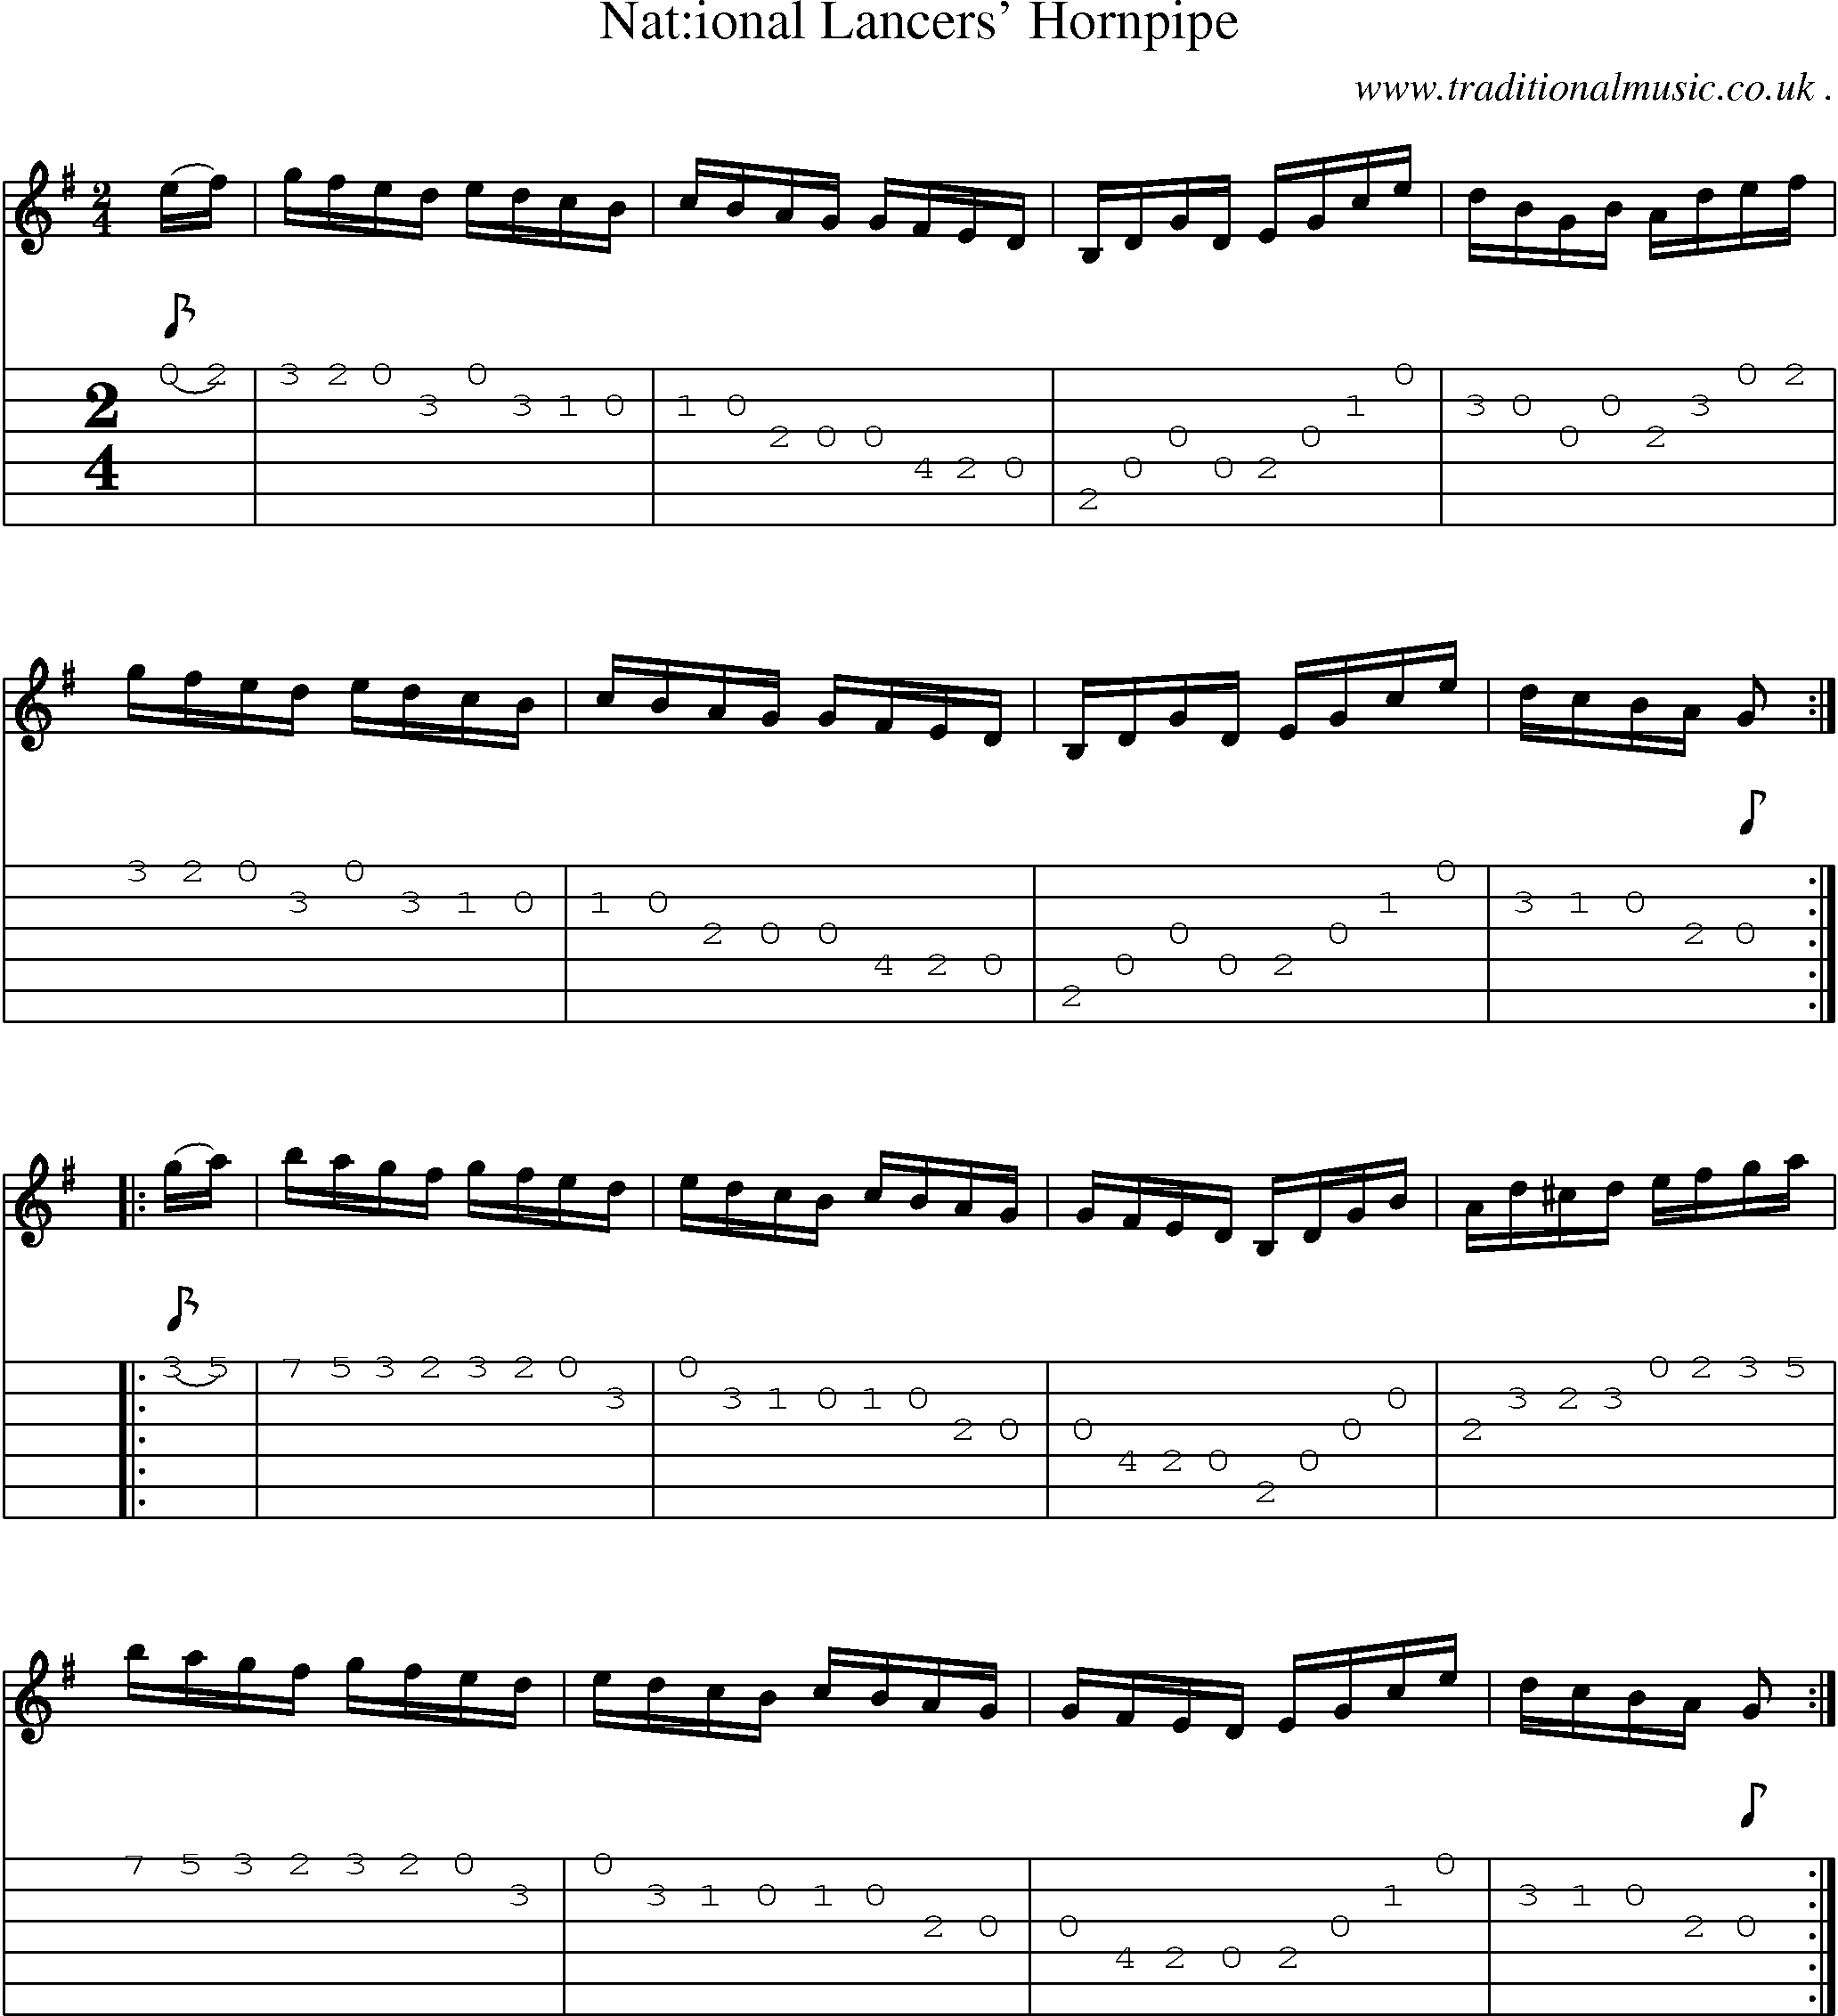 Sheet-Music and Guitar Tabs for National Lancers Hornpipe